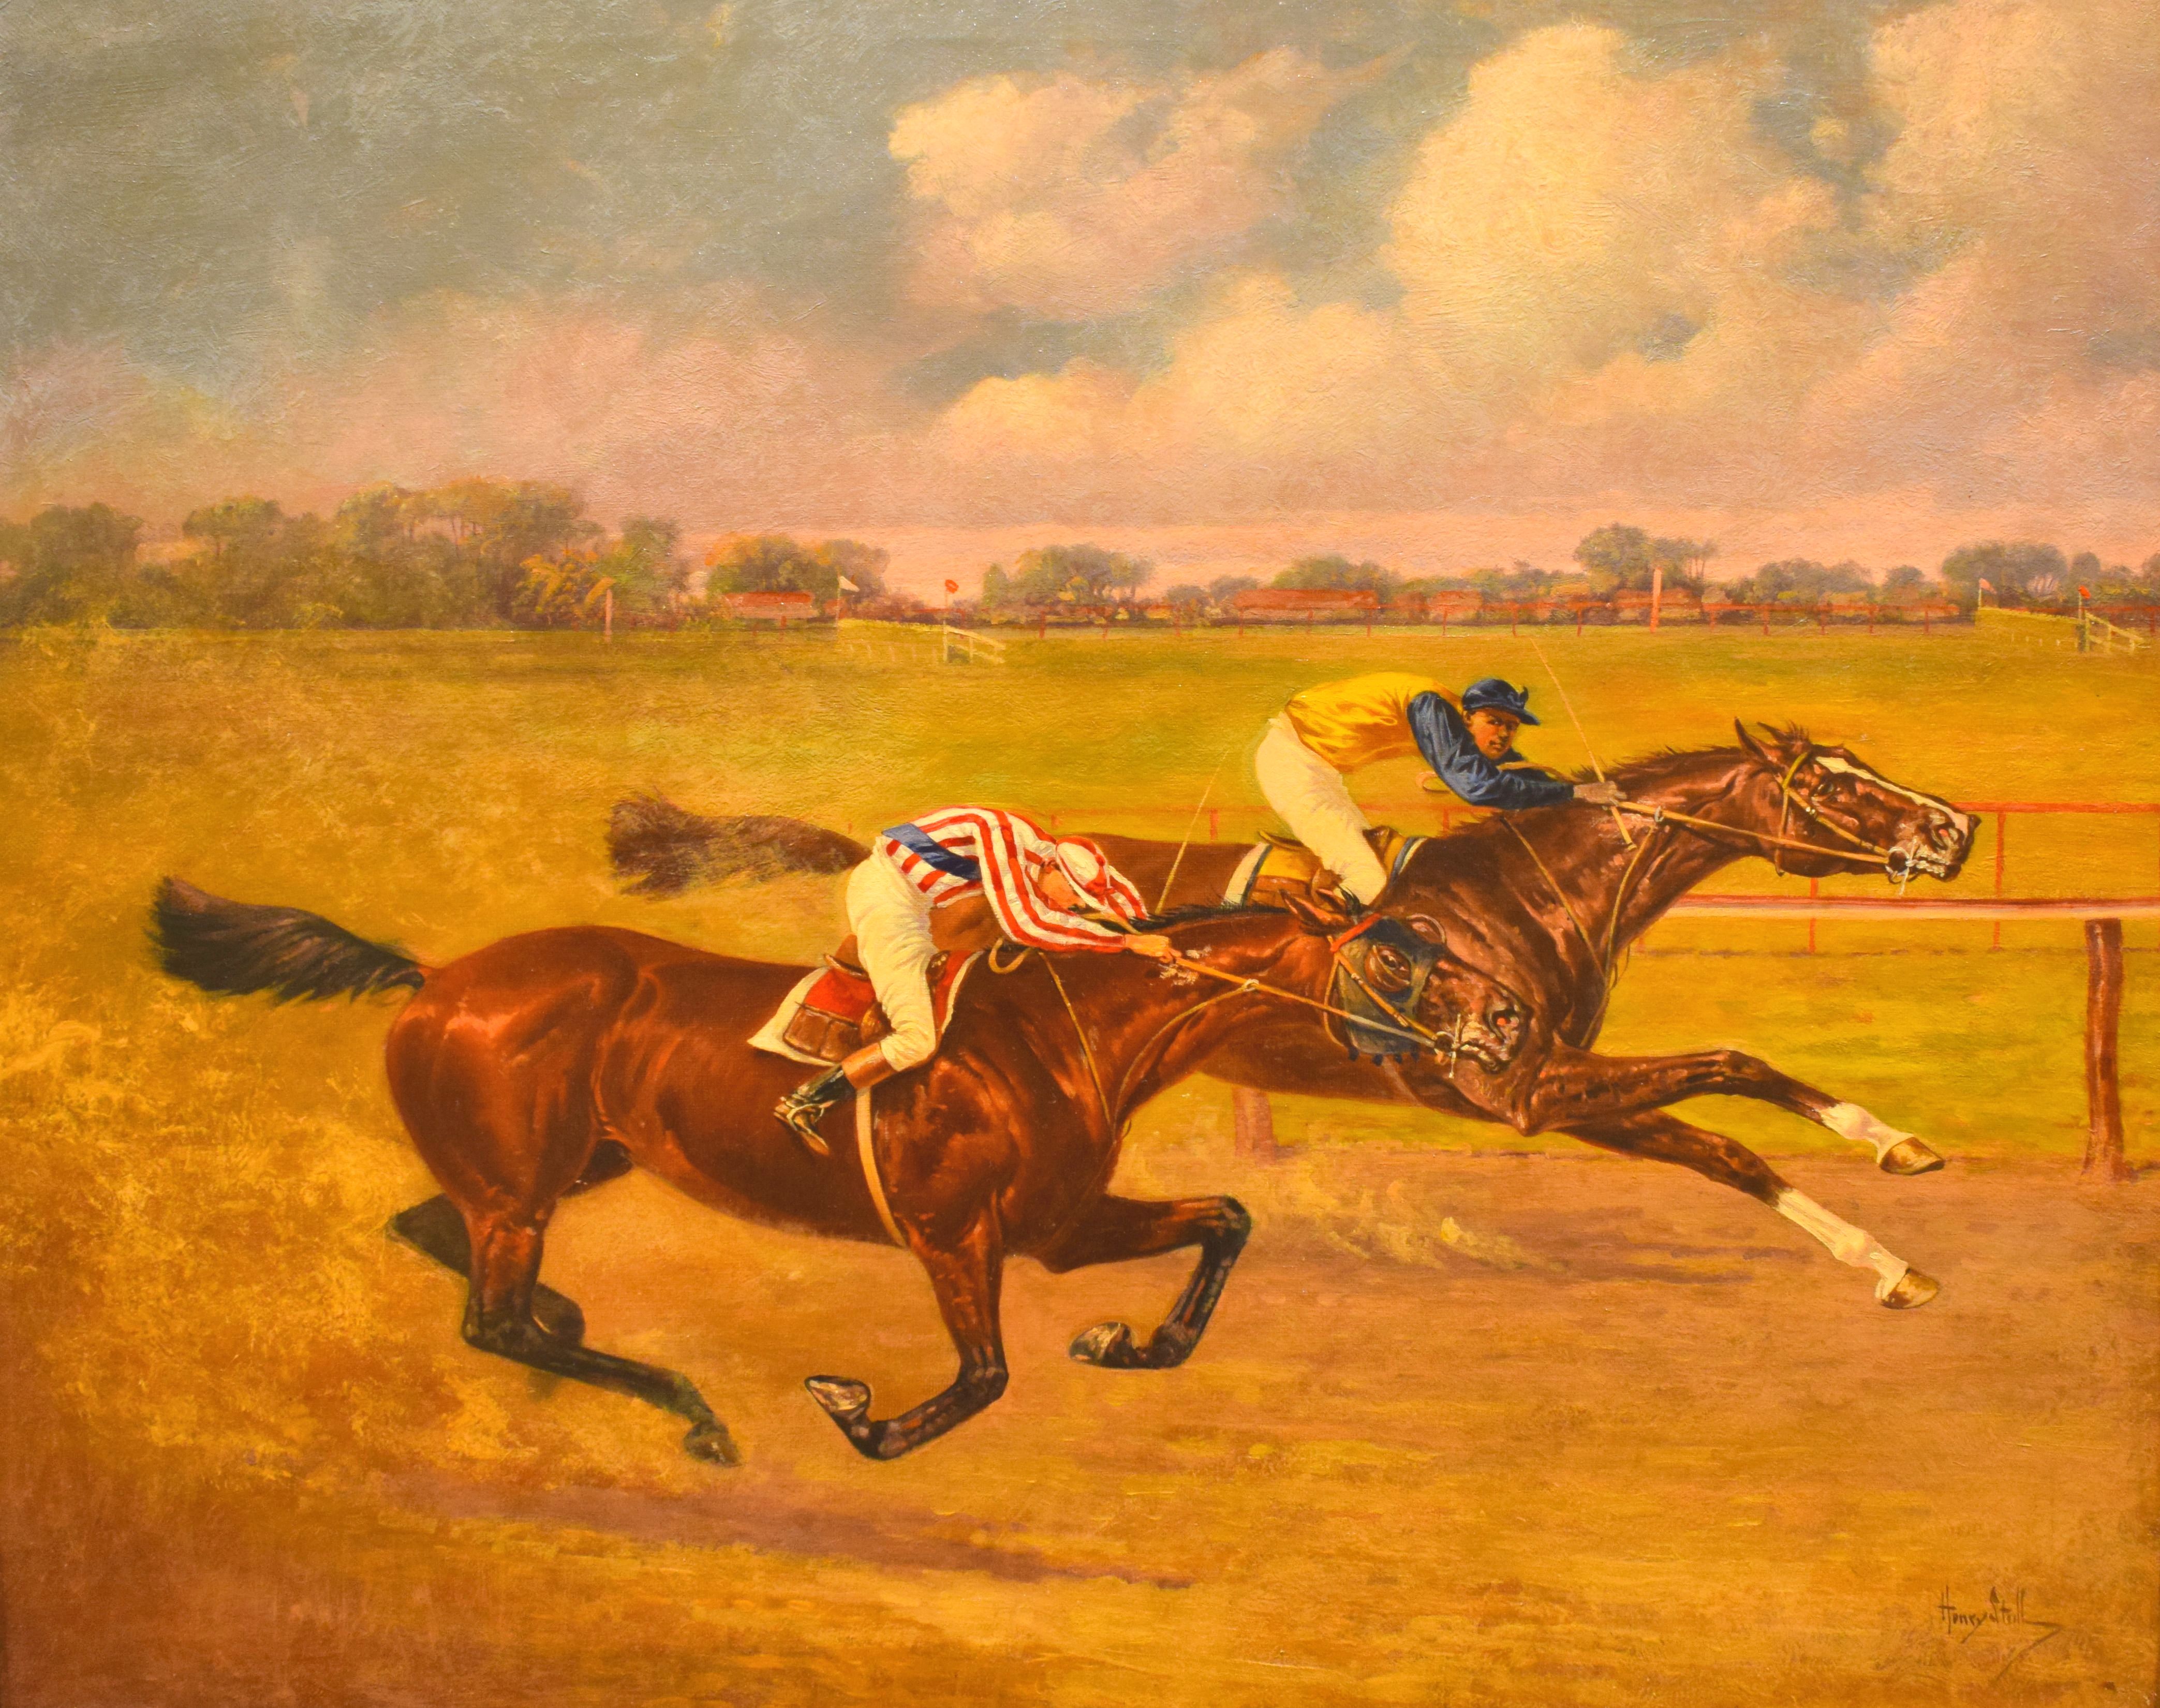 Salvator, on inside, vs. Tenny in "The Great $10,000 Match Race" painting by Henry Stull, 1890 (Museum Collection)